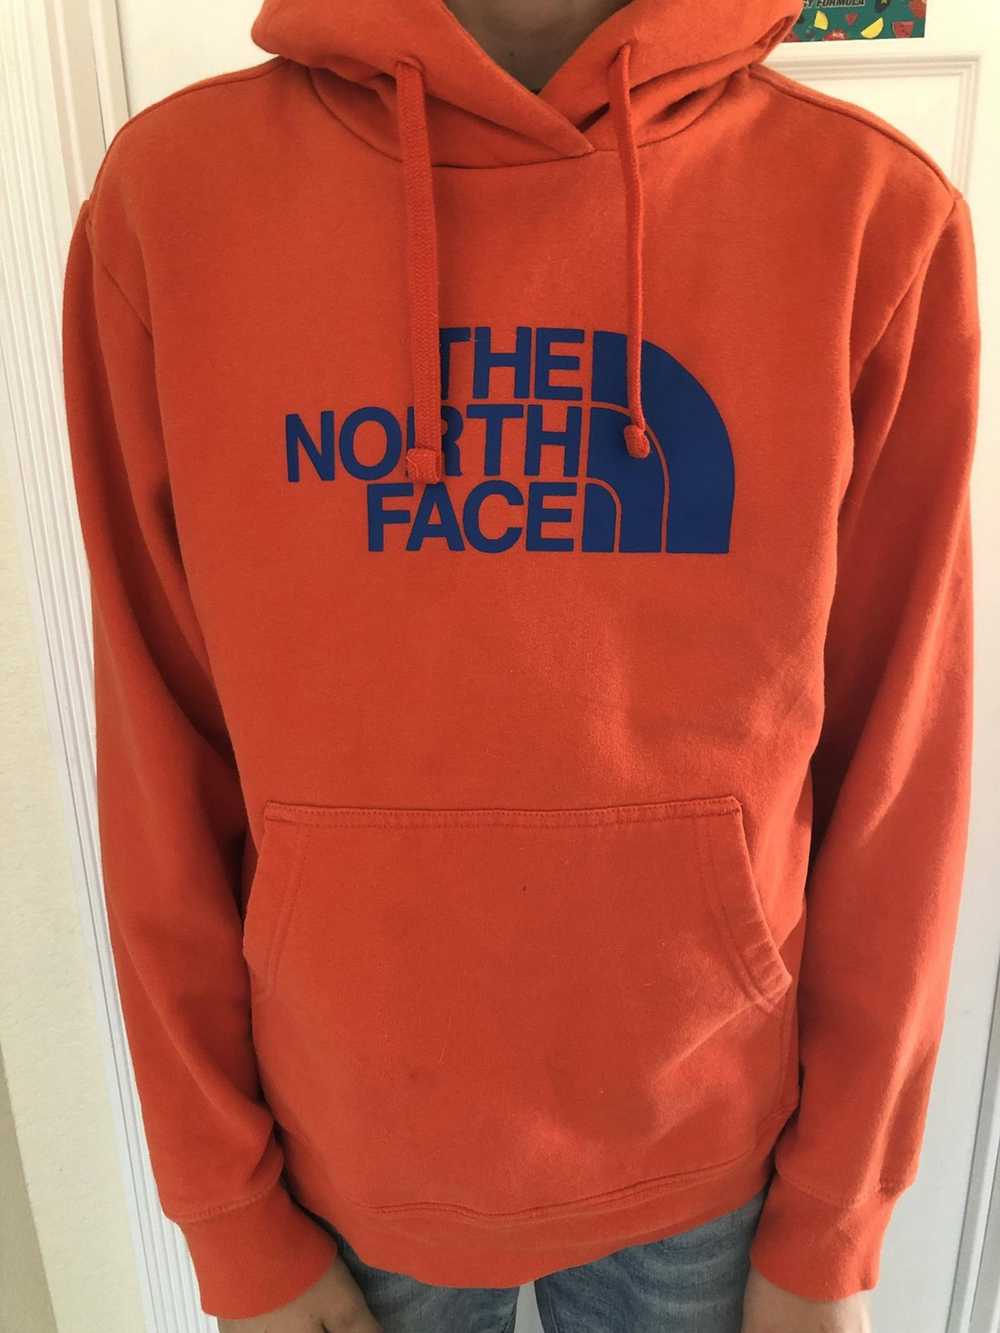 The North Face North Face hoodie - image 2